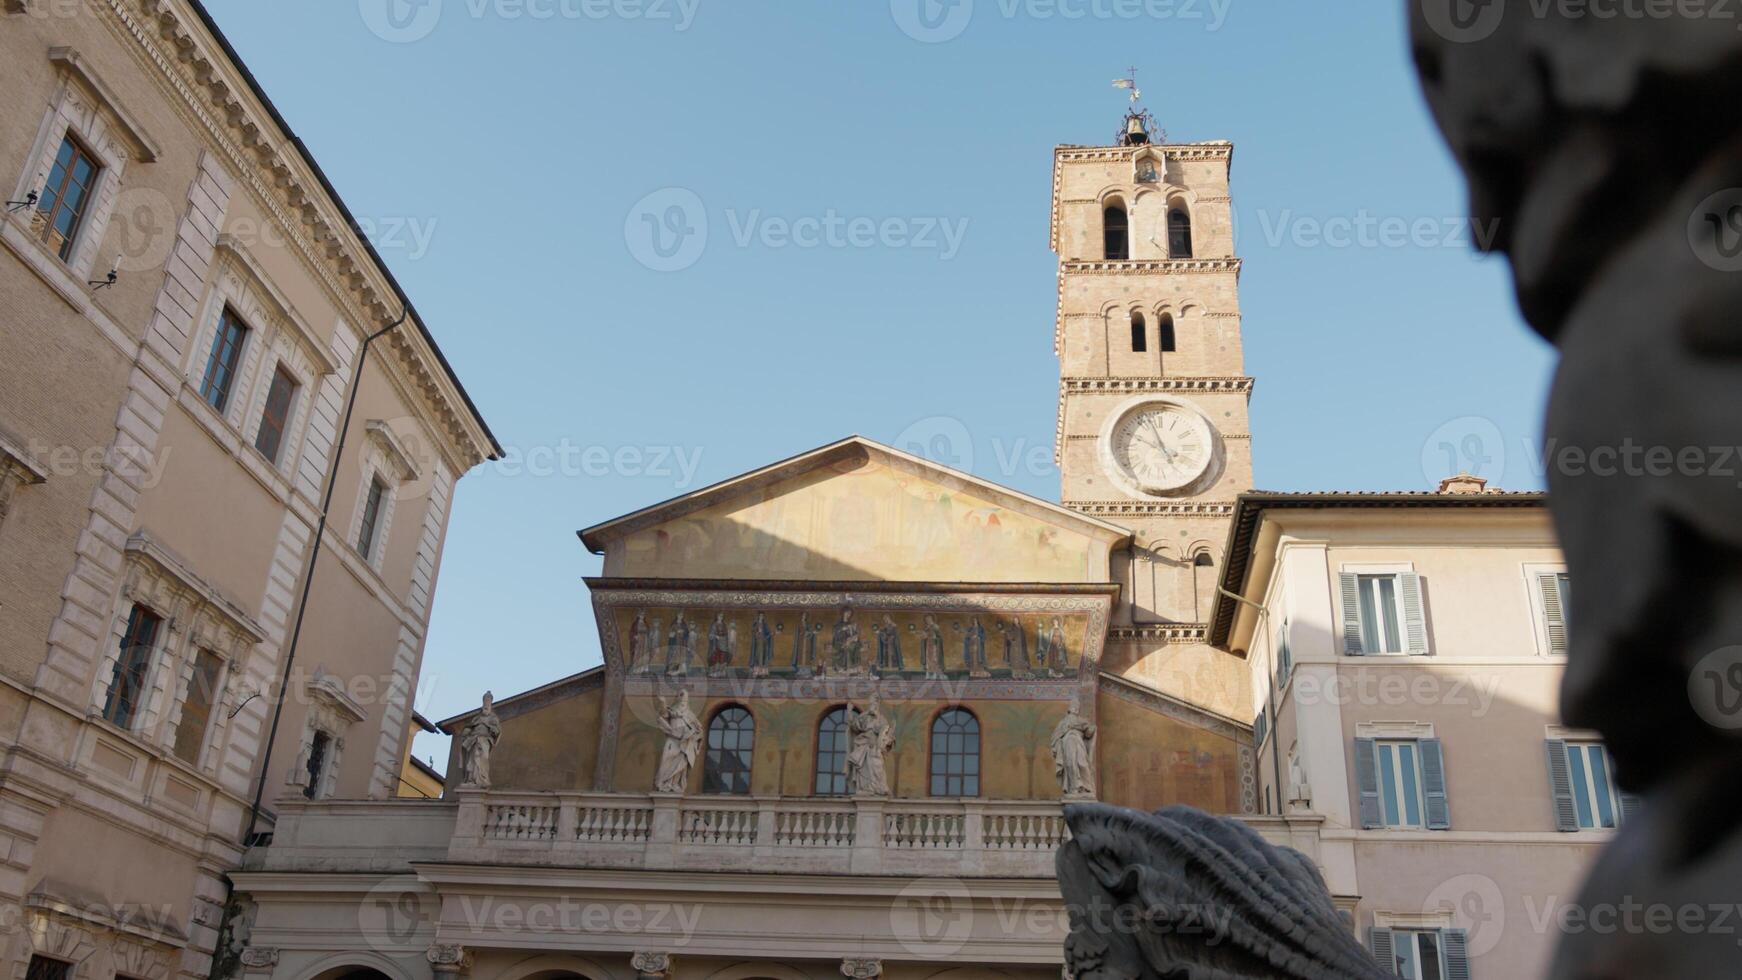 Basil Church and bell tower Of Santa Maria In Trastevere In Rome photo